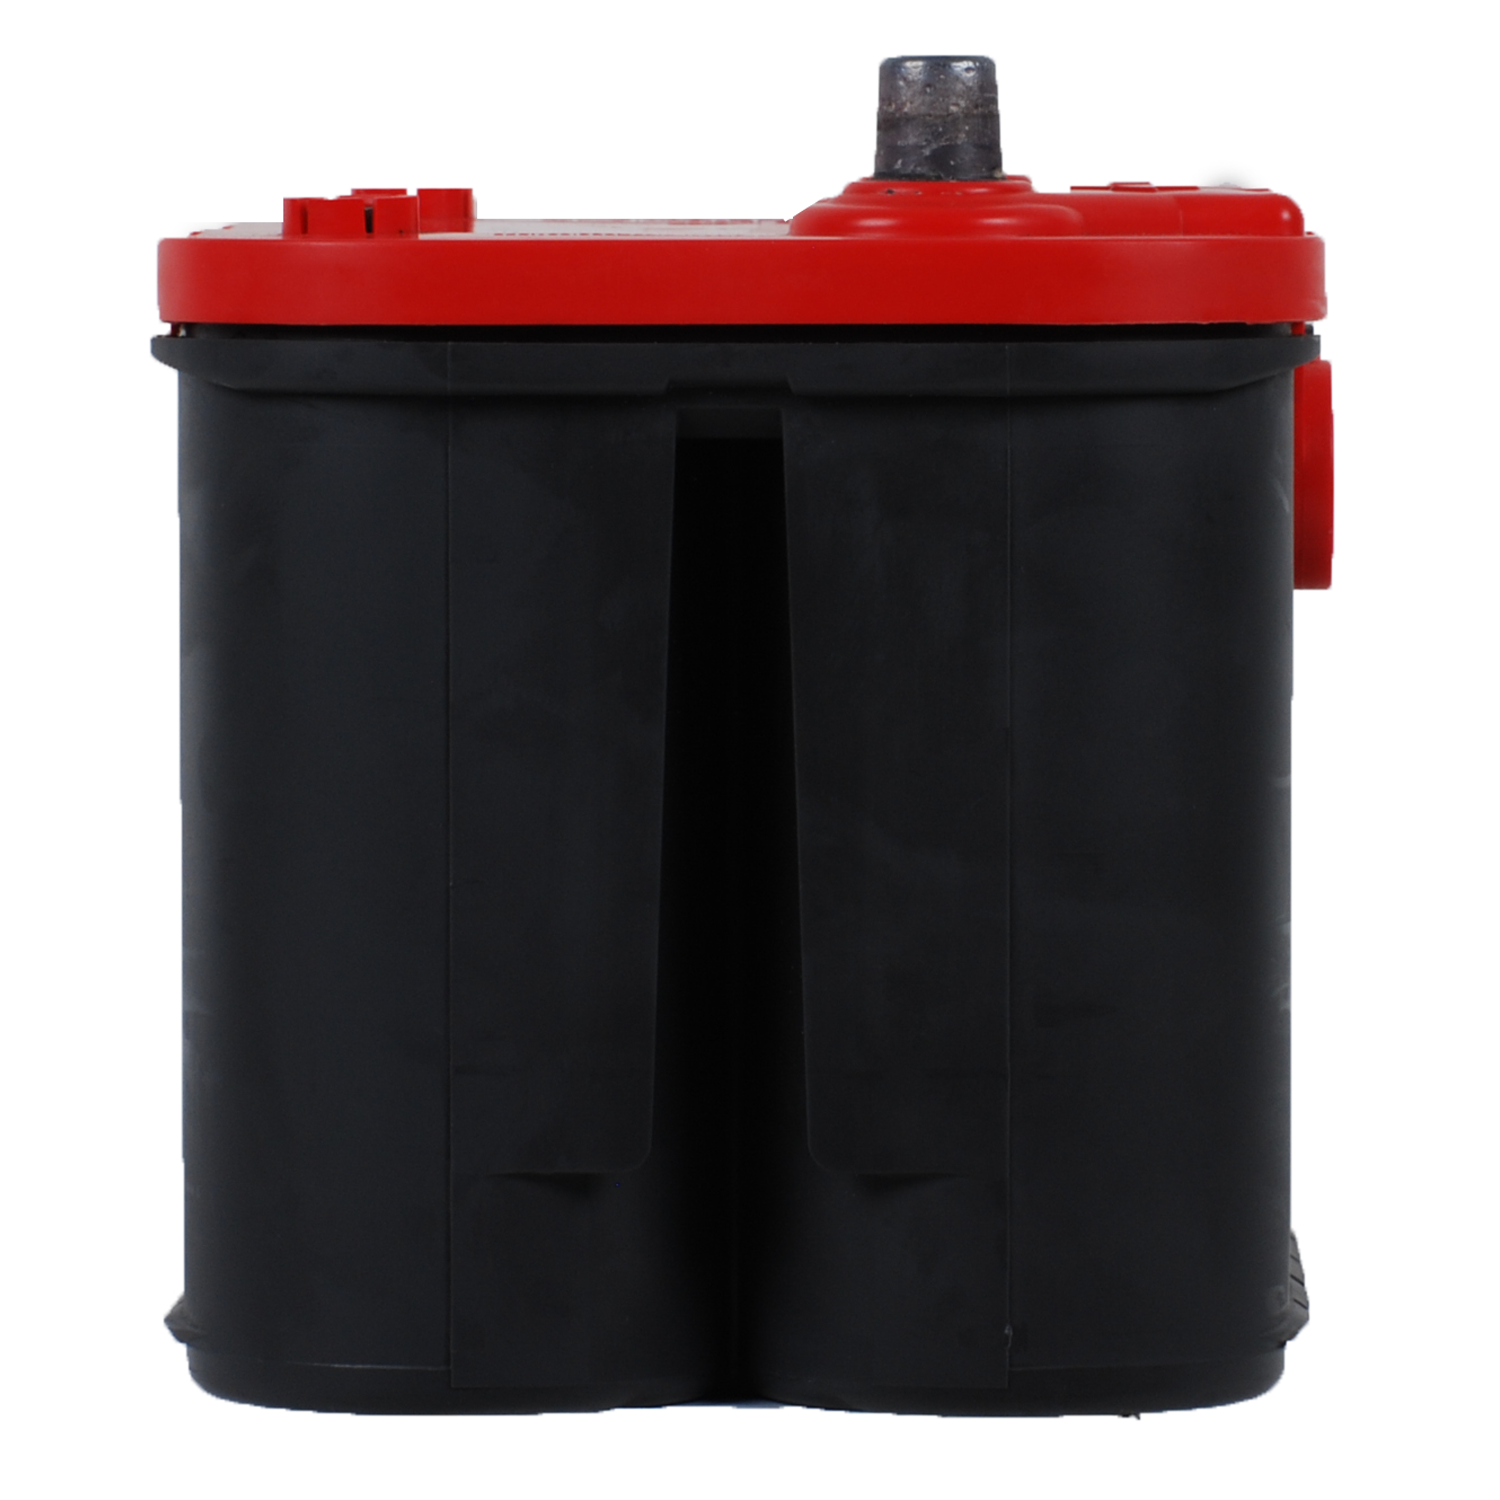 OPTIMA RedTop AGM Spiralcell Automotive Starting Battery, Group Size 34/78, 12 Volt 800 CCA - image 4 of 7